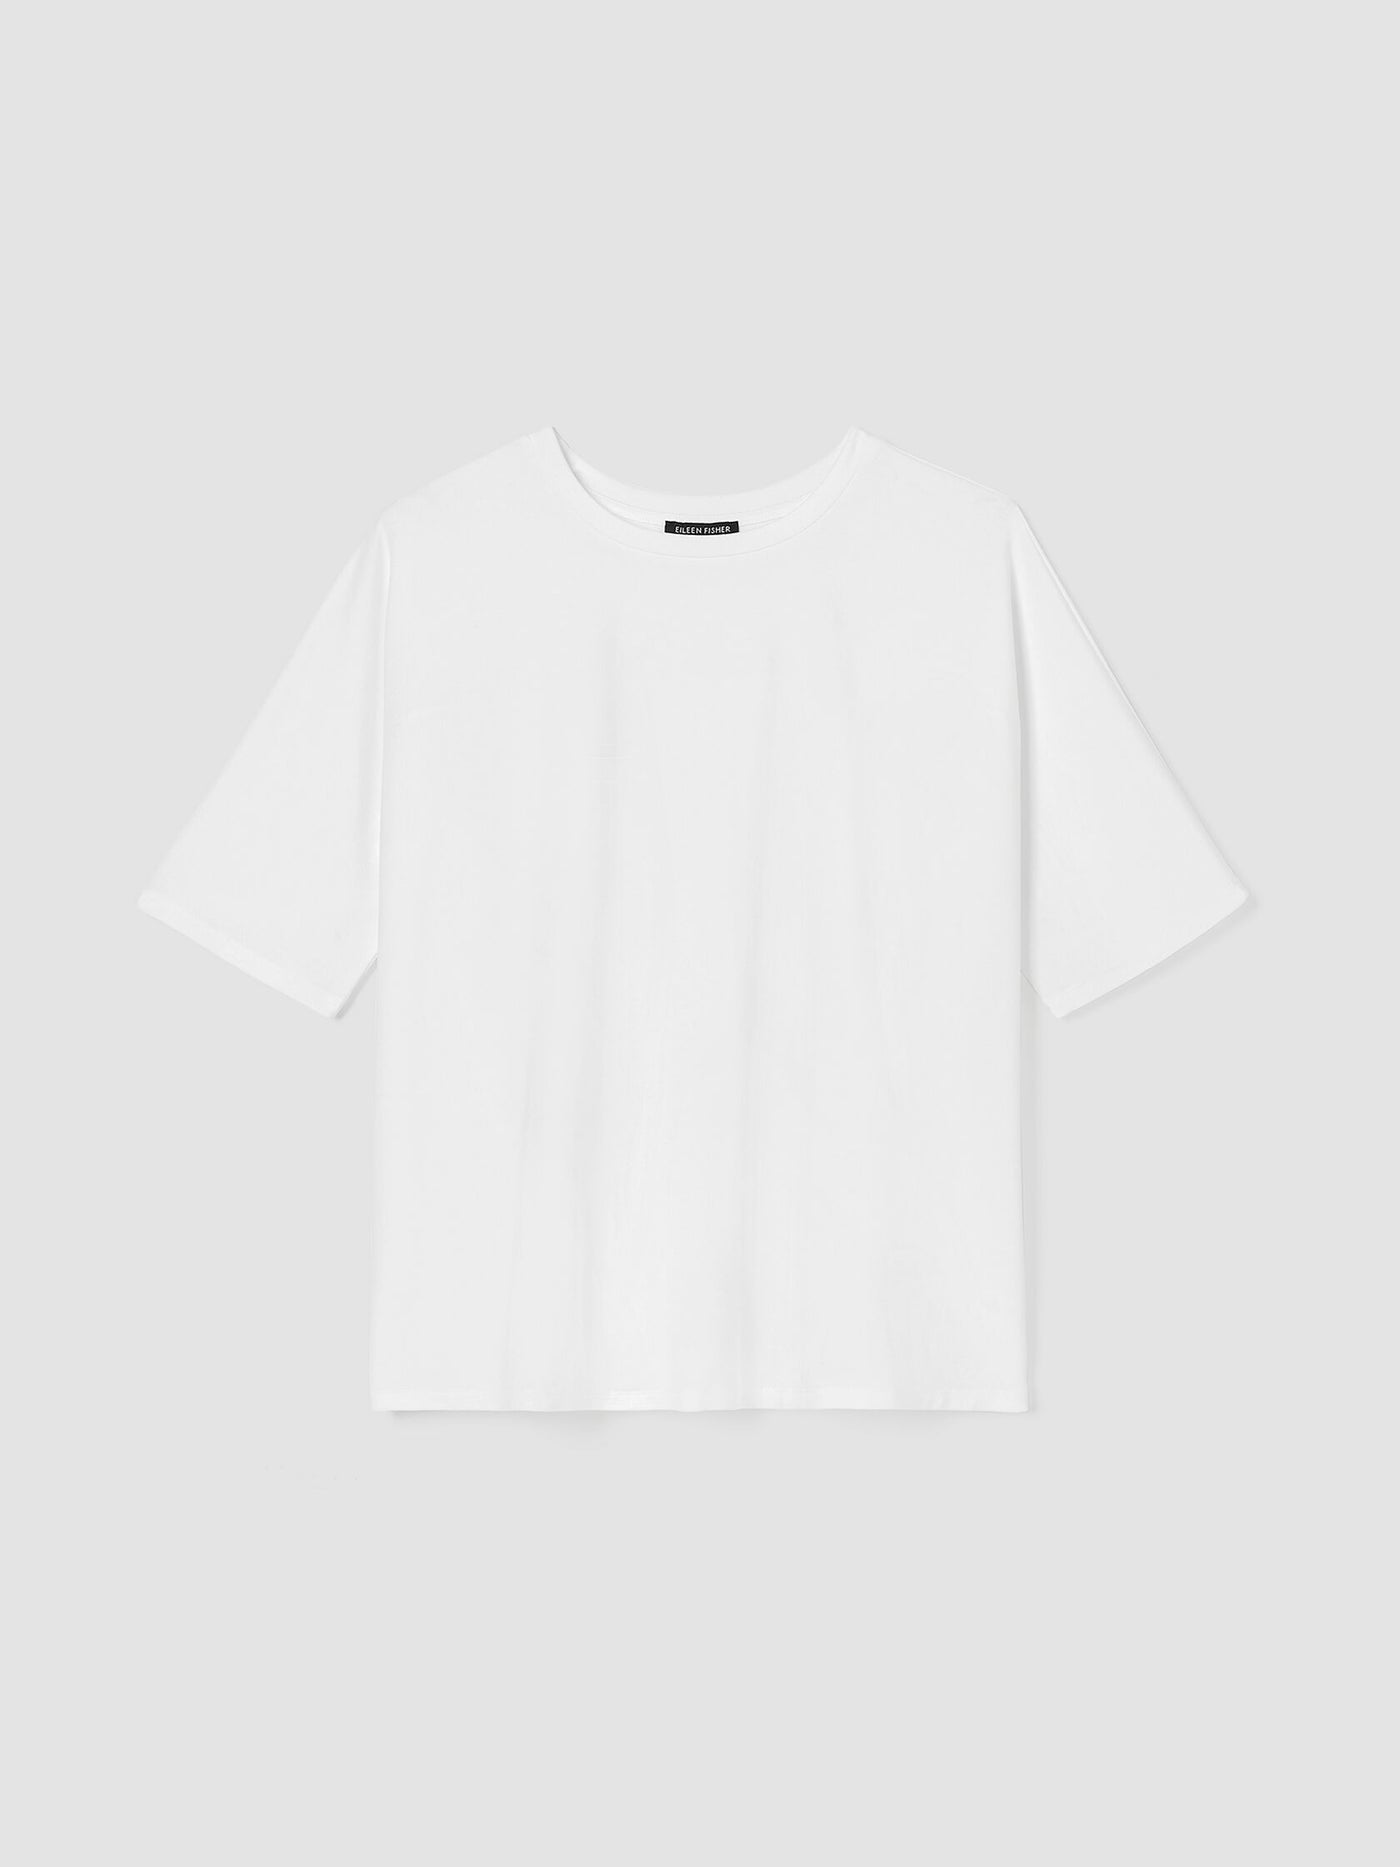 Eileen Fisher Jersey Knit Crewneck Boxy Tee with Pleat back in White